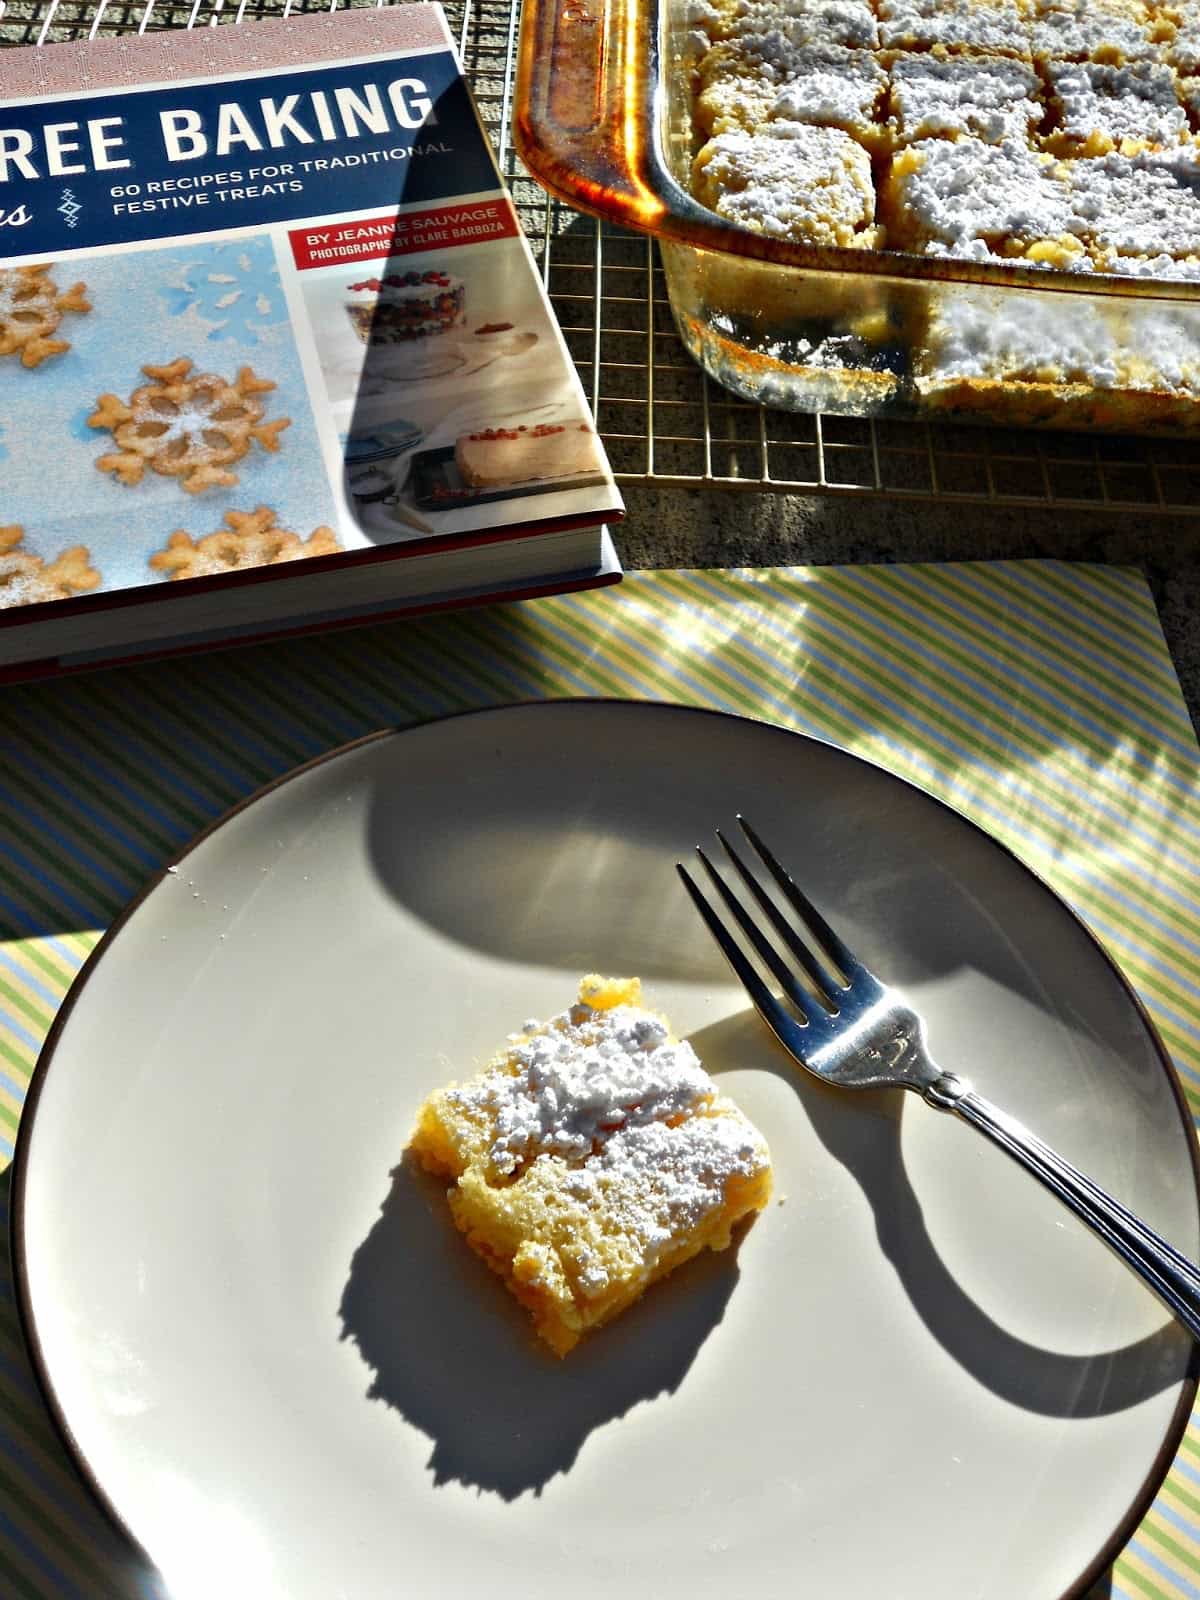 Gluten Free Lemon Bars and Gluten-Free Baking for the Holidays by Jeanne Sauvage